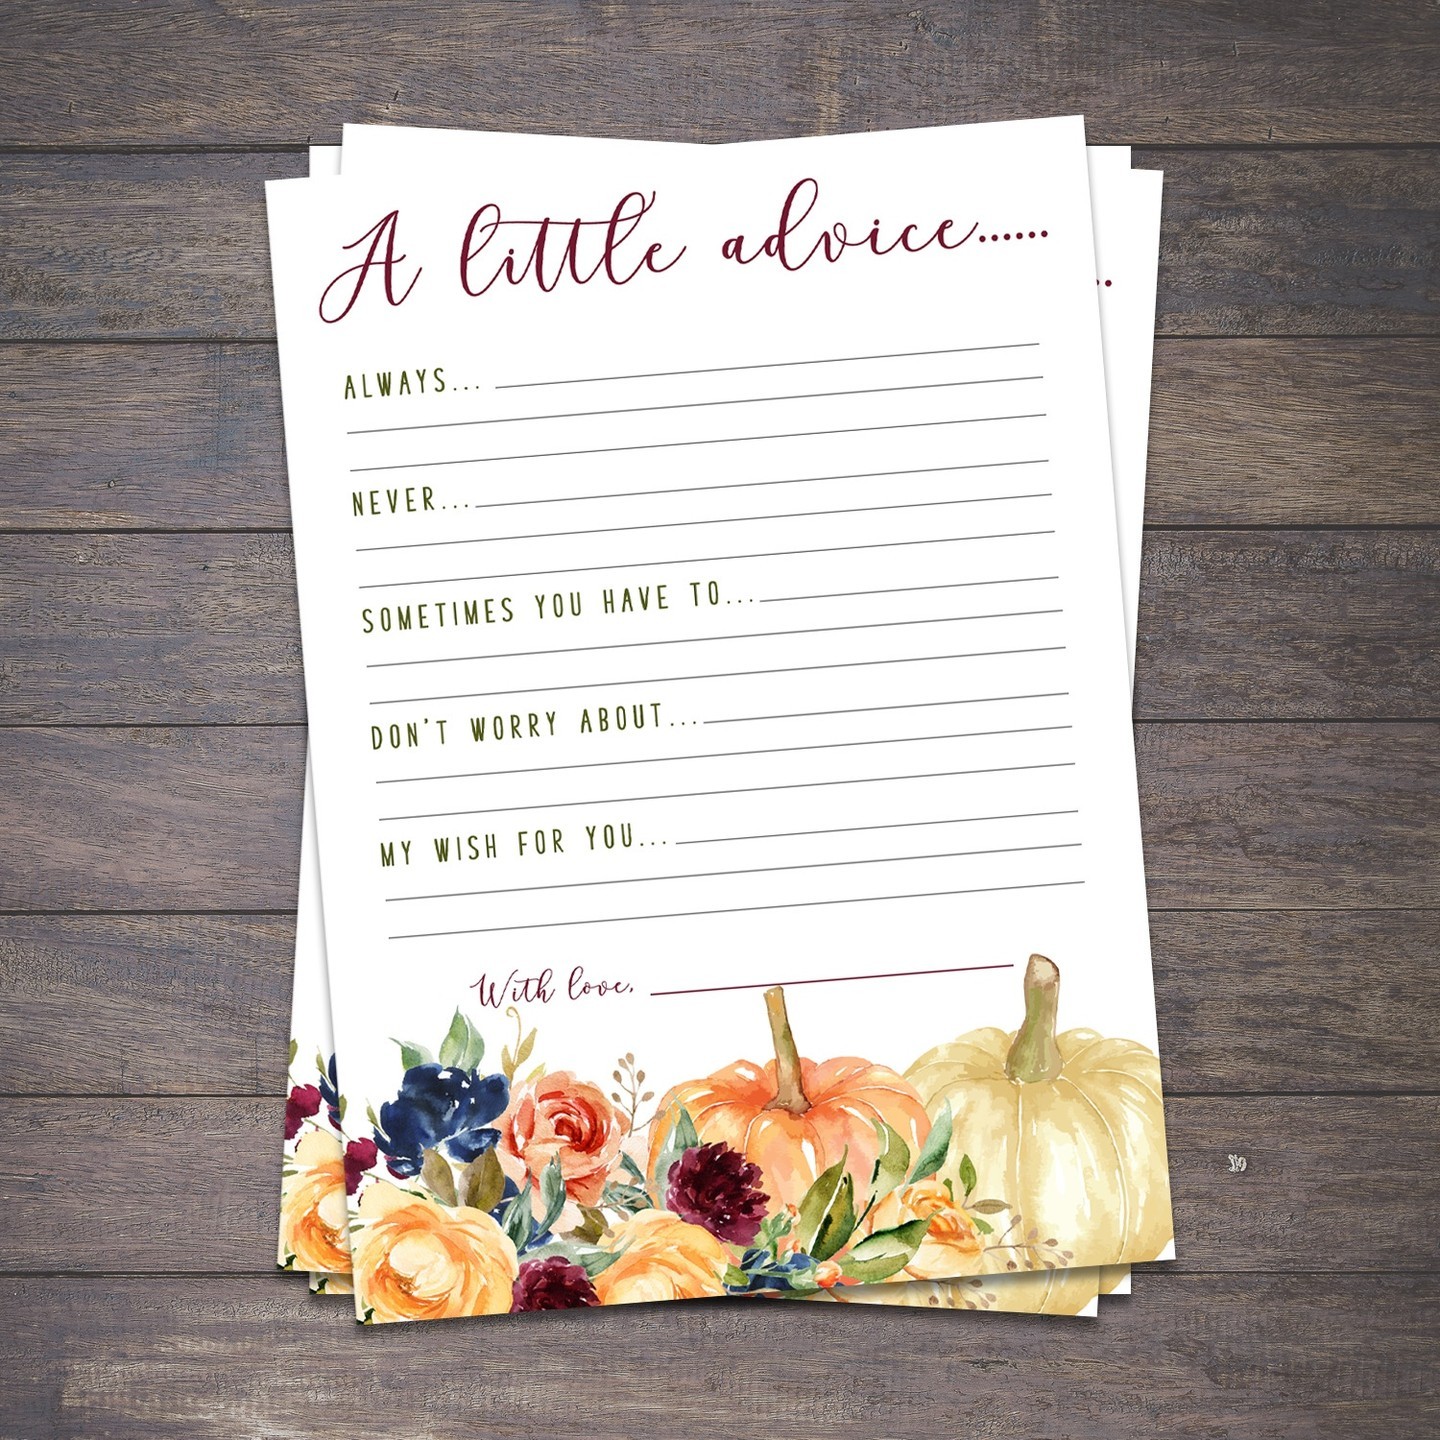 Instant downloads >> 🧡 you can get them the minute you need them!⁠
These give the guests a little something to do, and they're so fun to read afterwards!⁠
⁠
{ Available in my Etsy shop }⁠
⁠
#receptionideas #showerideas #showergames #advicecards #advicefornewleyweds #adviceforparents #racheldesignsshop #fallshowerideas #fallshowergames